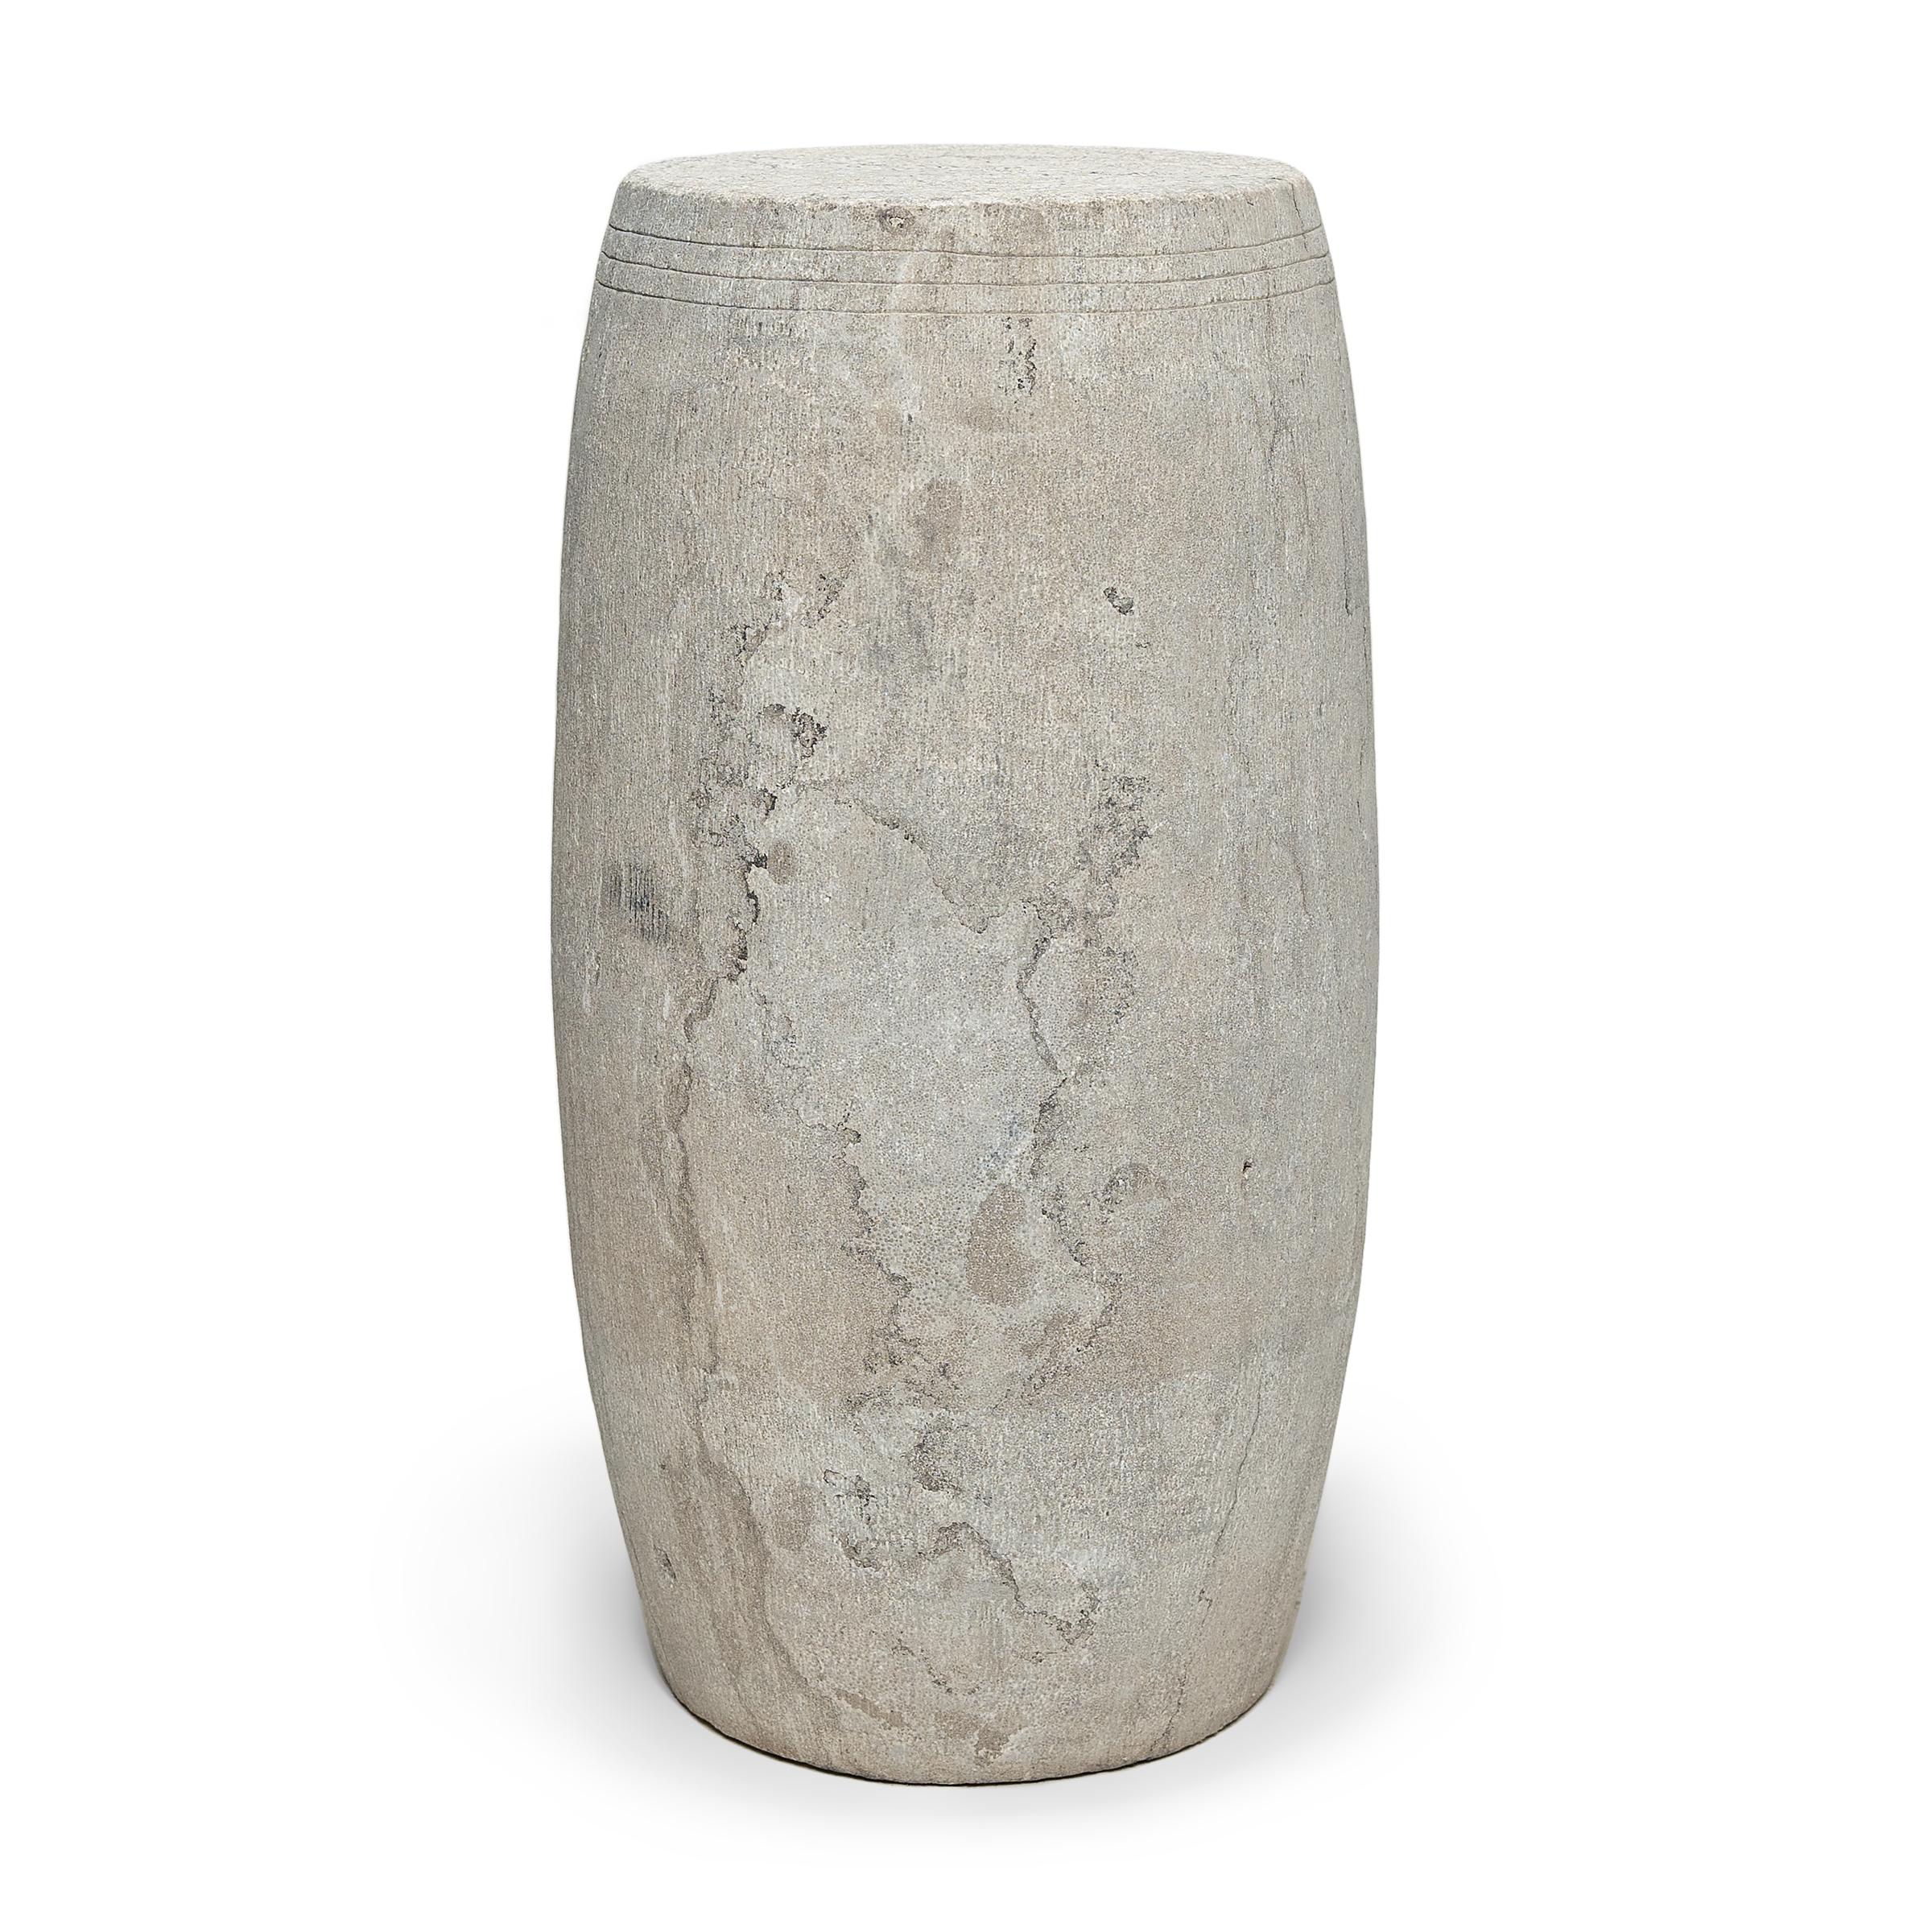 This narrow drum stool was carved from a solid block of limestone with a Minimalist tapered design. The stool is subtly etched with thin grooves around the top, suggestive of the lines drawn by stretched hide on an actual drum. Traditionally used as